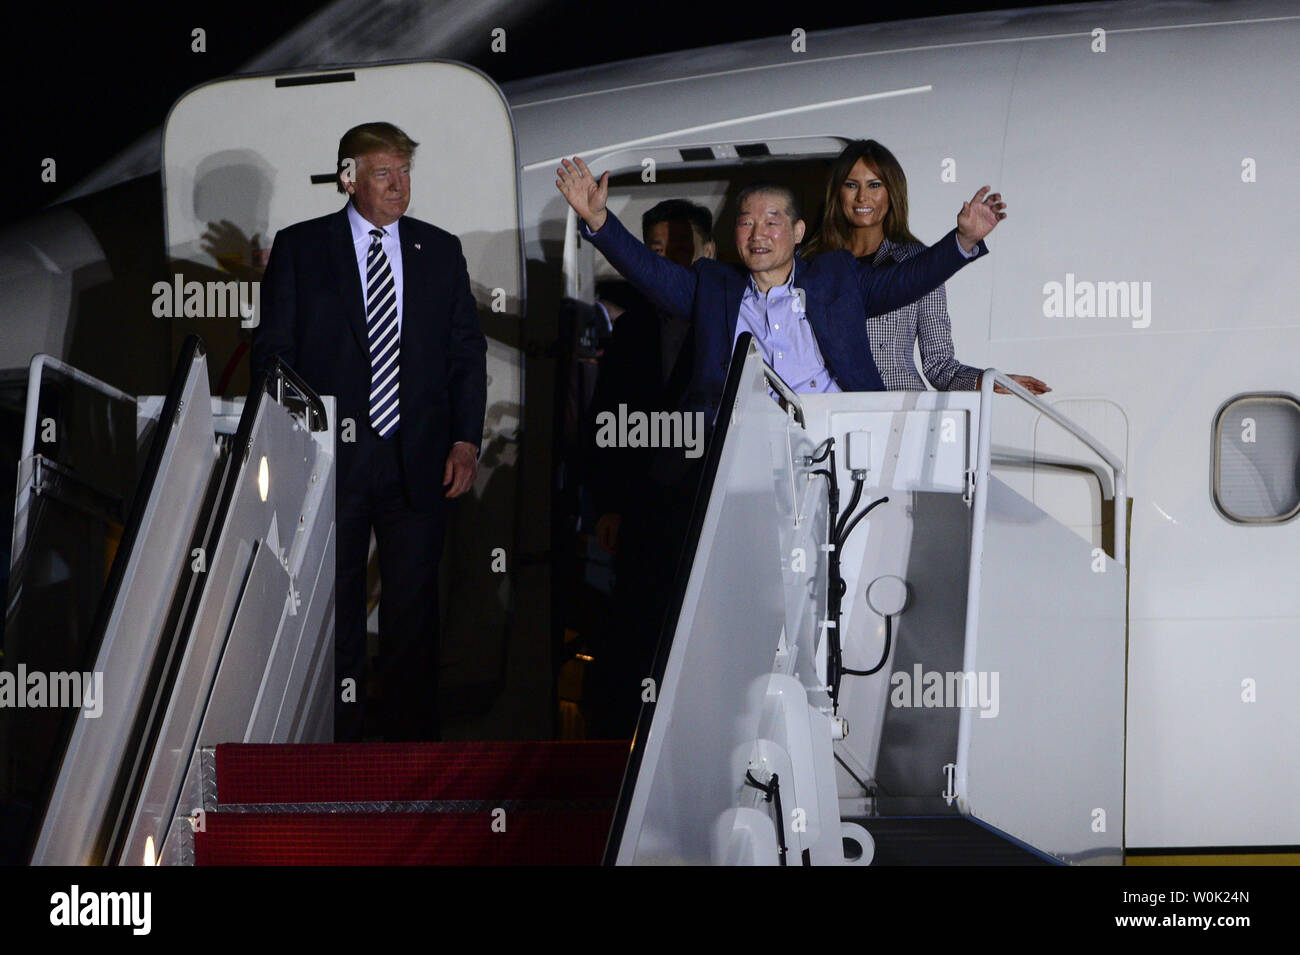 President Donald Trump looks on as US detainee Kim Dong-chul raises his arms upon his return to the United States with Kim Hak-song and Tony Kim after they were released by North Korea, at Joint Base Andrews in Maryland on May 10, 2018. Photo by Leigh Vogel/UPI Stock Photo